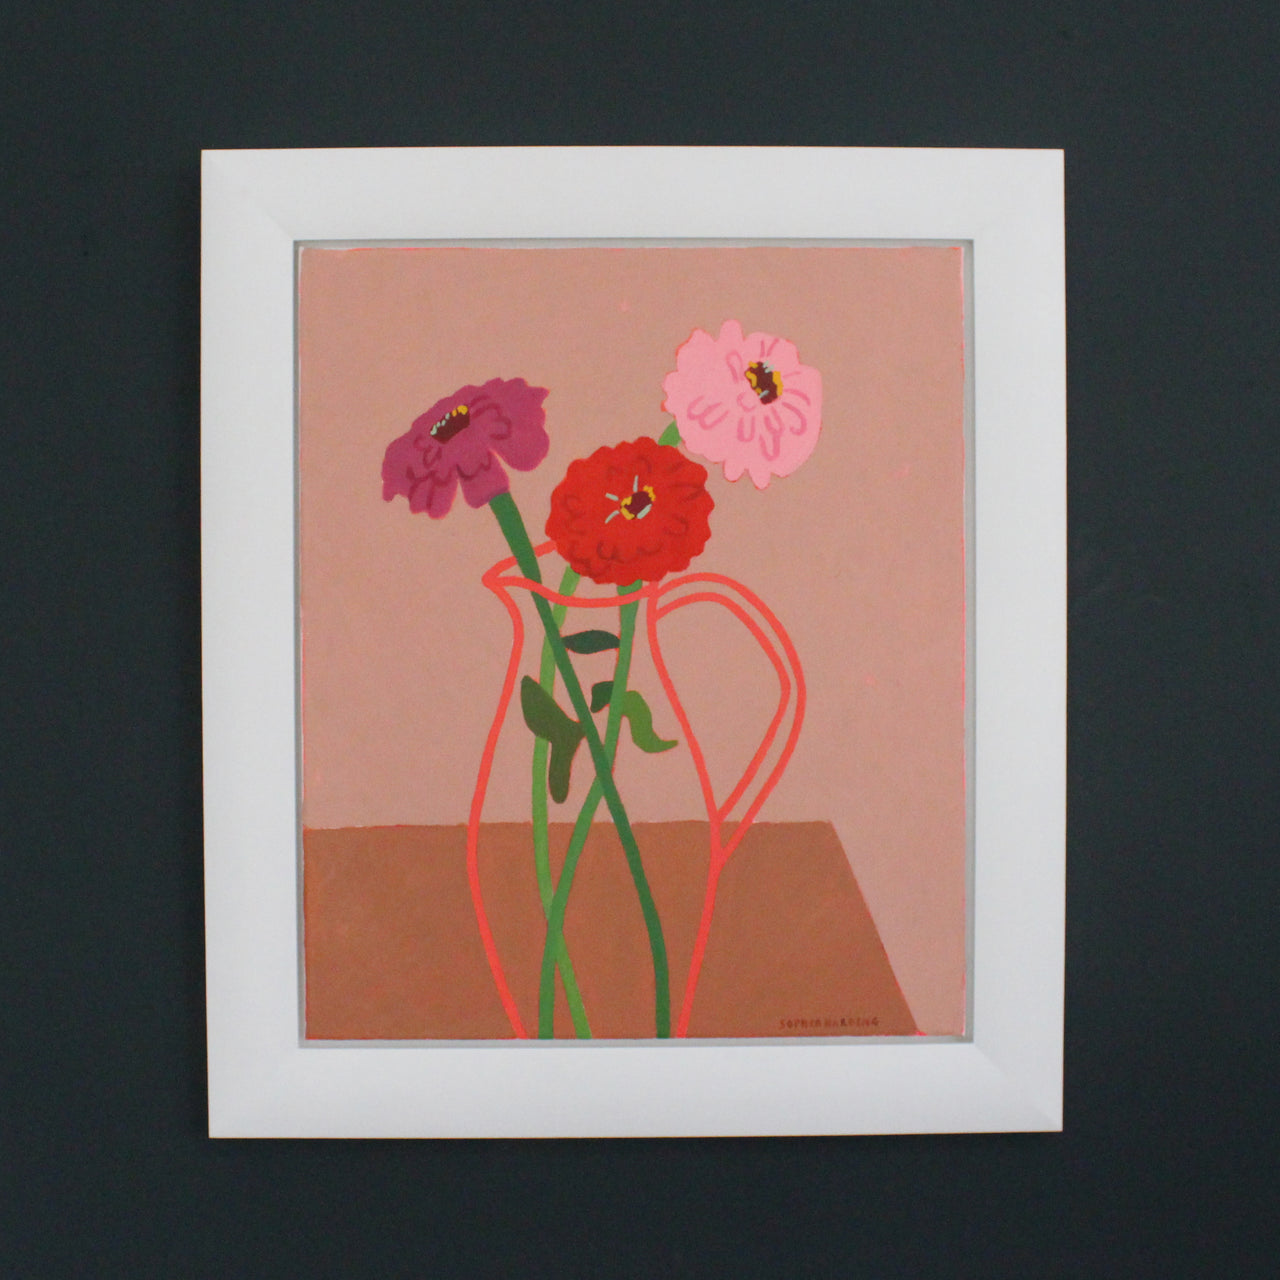 framed Sophie Harding painting called  Penzance Zinnias 3 Pink Flowers in clear vase on wooden table